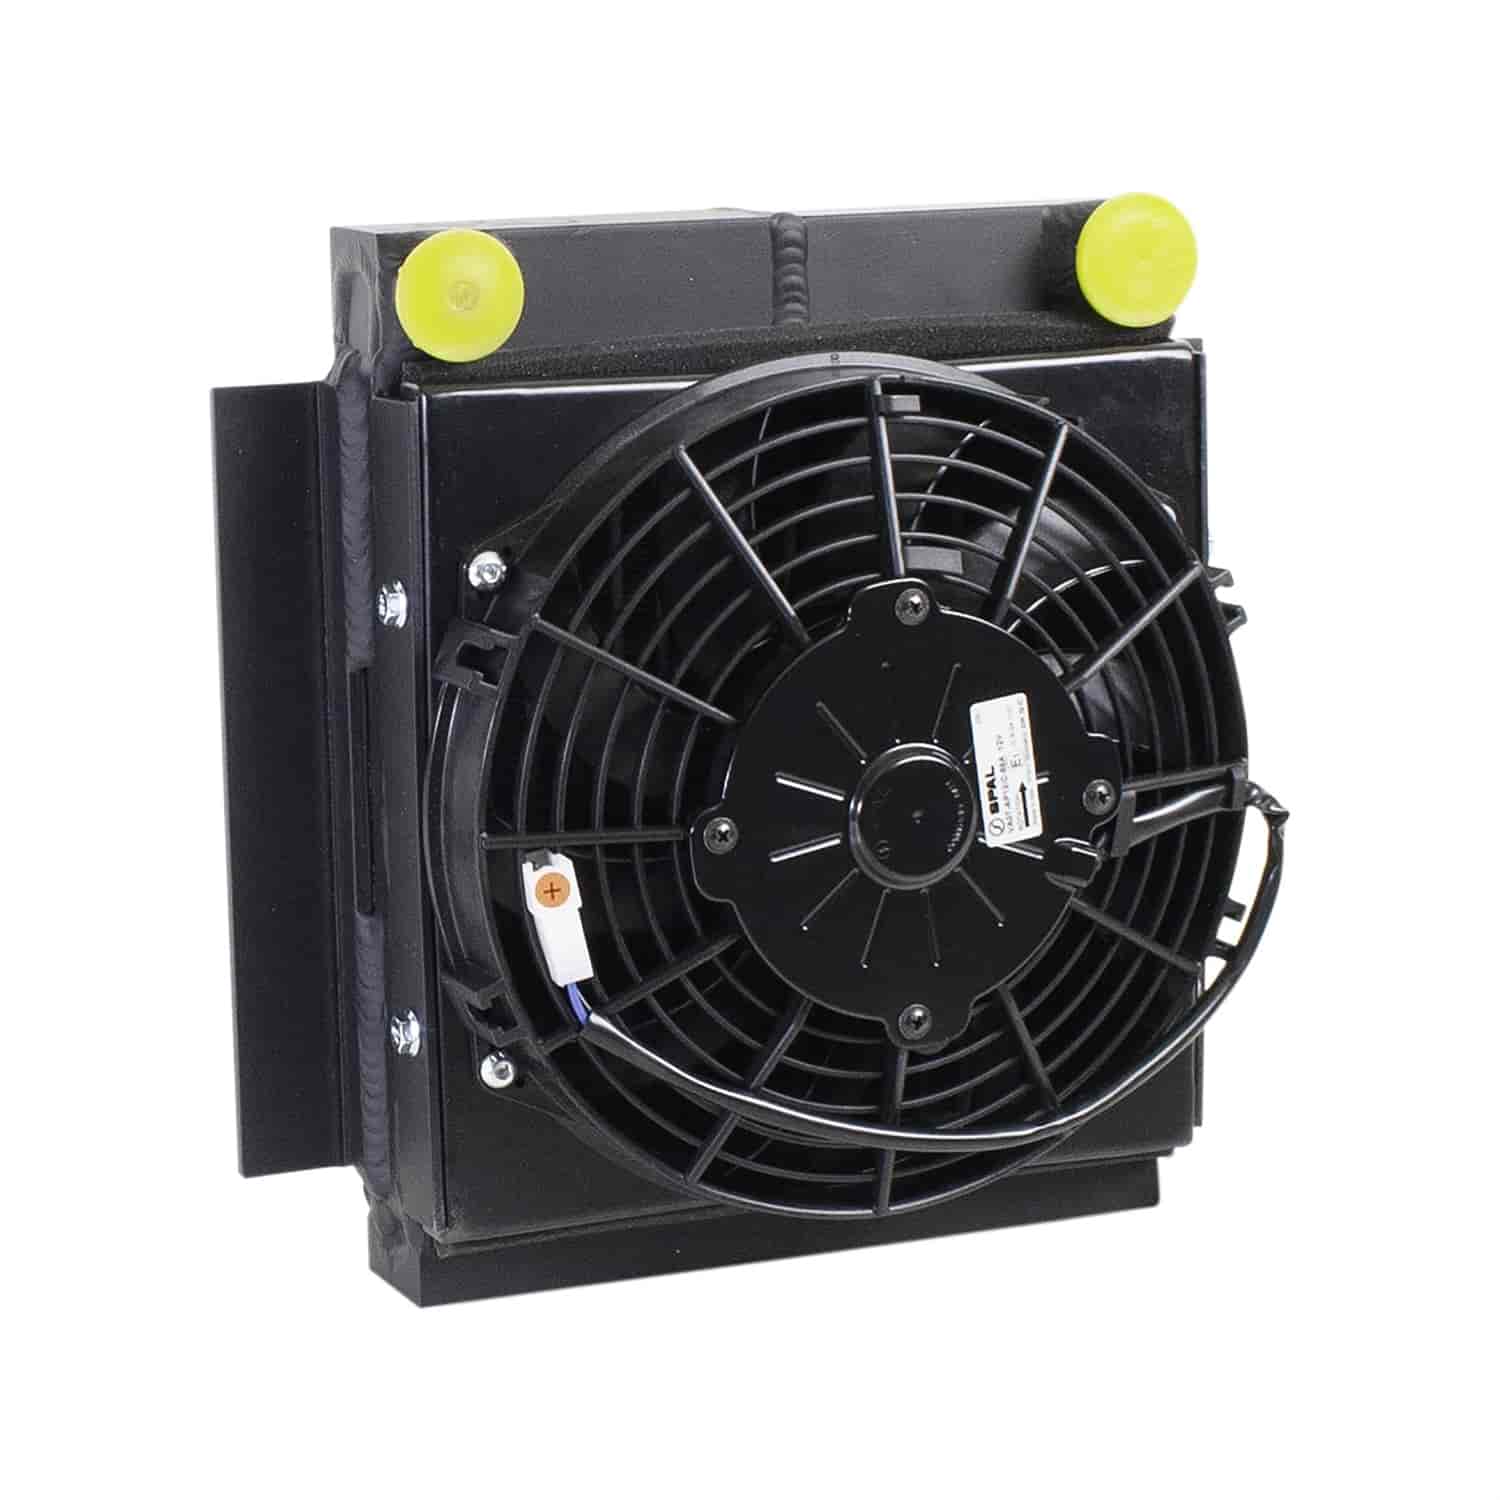 Small Universal Fluid Cooler 9.5" x 12.5" with Electric Fan